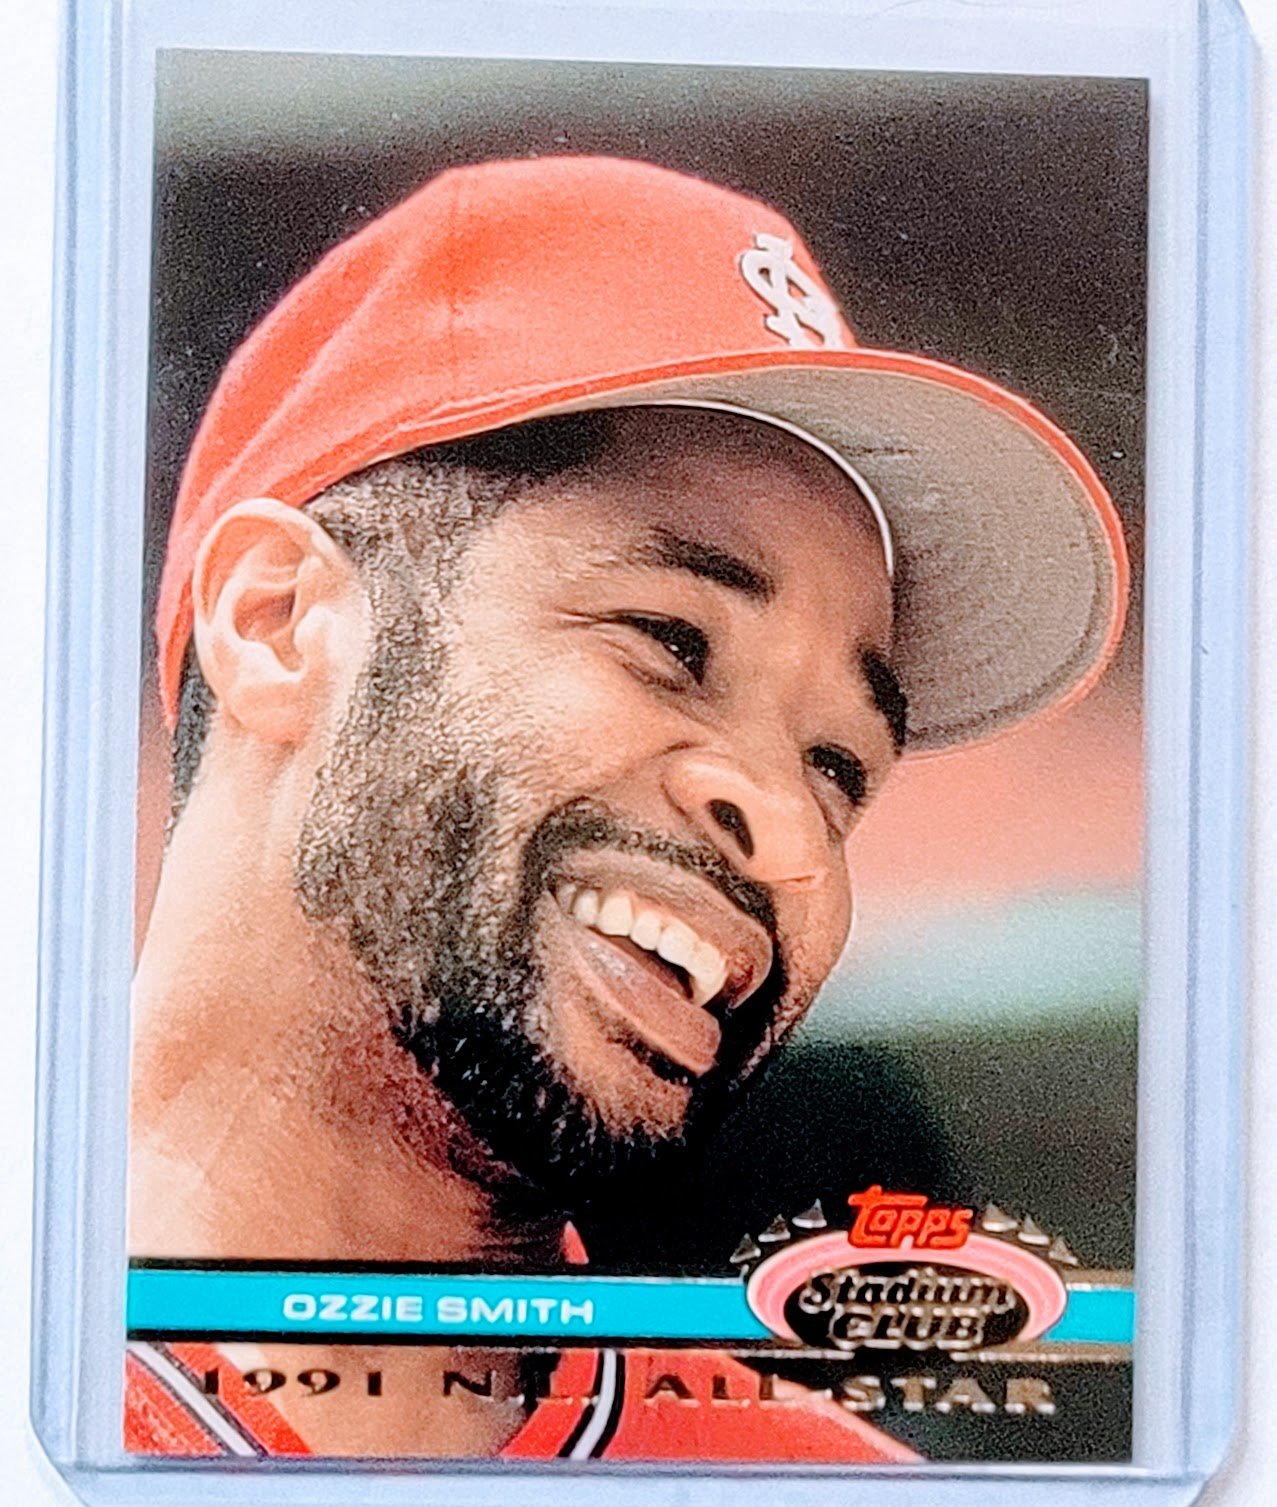 1992 Topps Stadium Club Dome Ozzie Smith 1991 All Star MLB Baseball Trading Card TPTV simple Xclusive Collectibles   